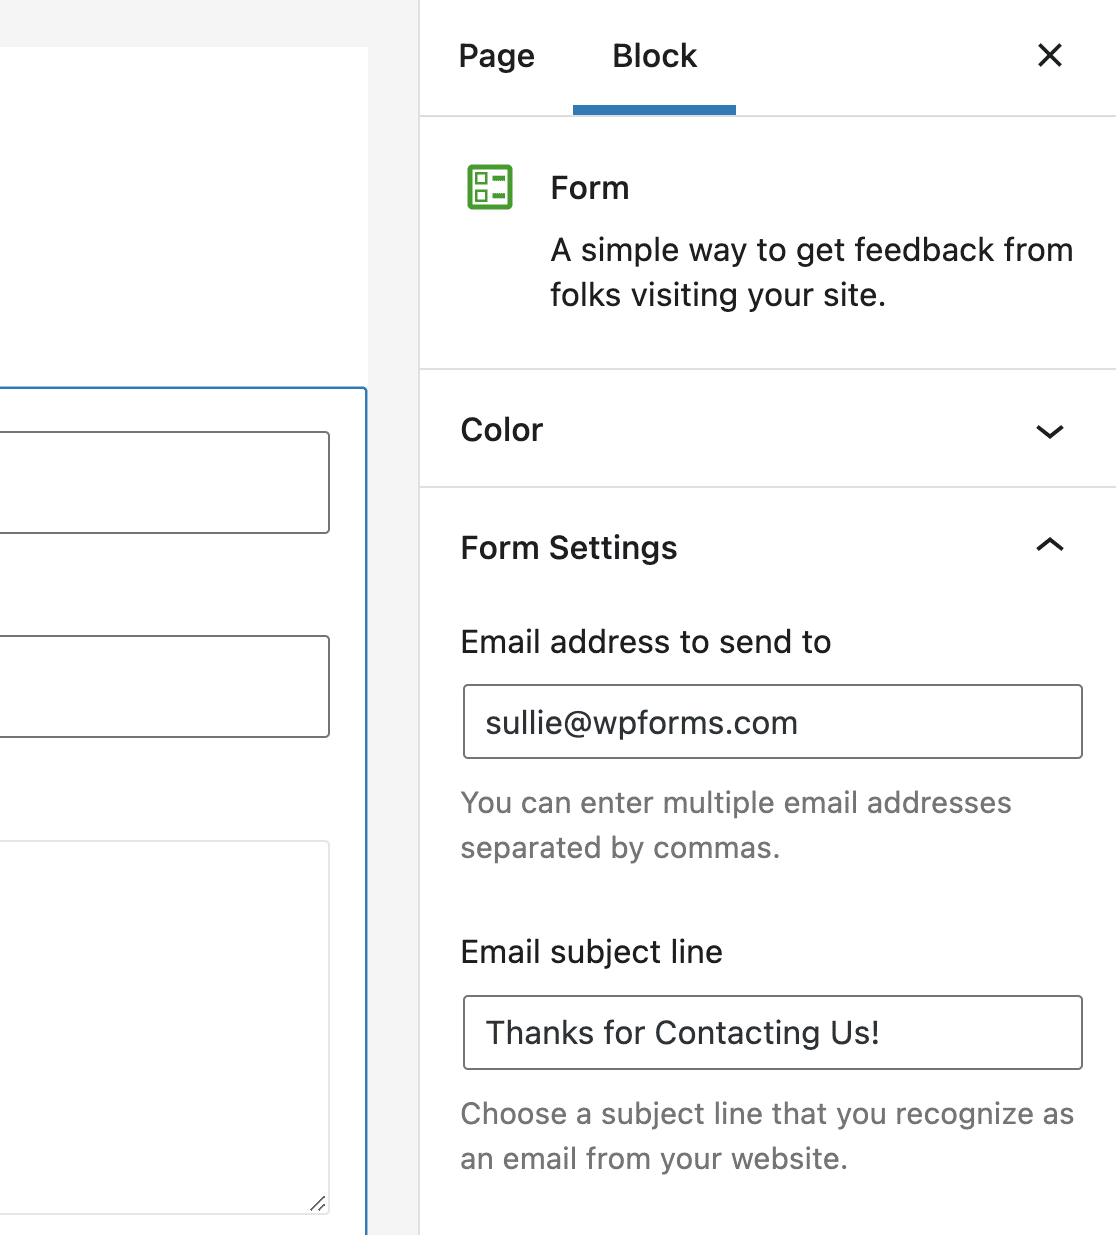 The Jetpack form email settings